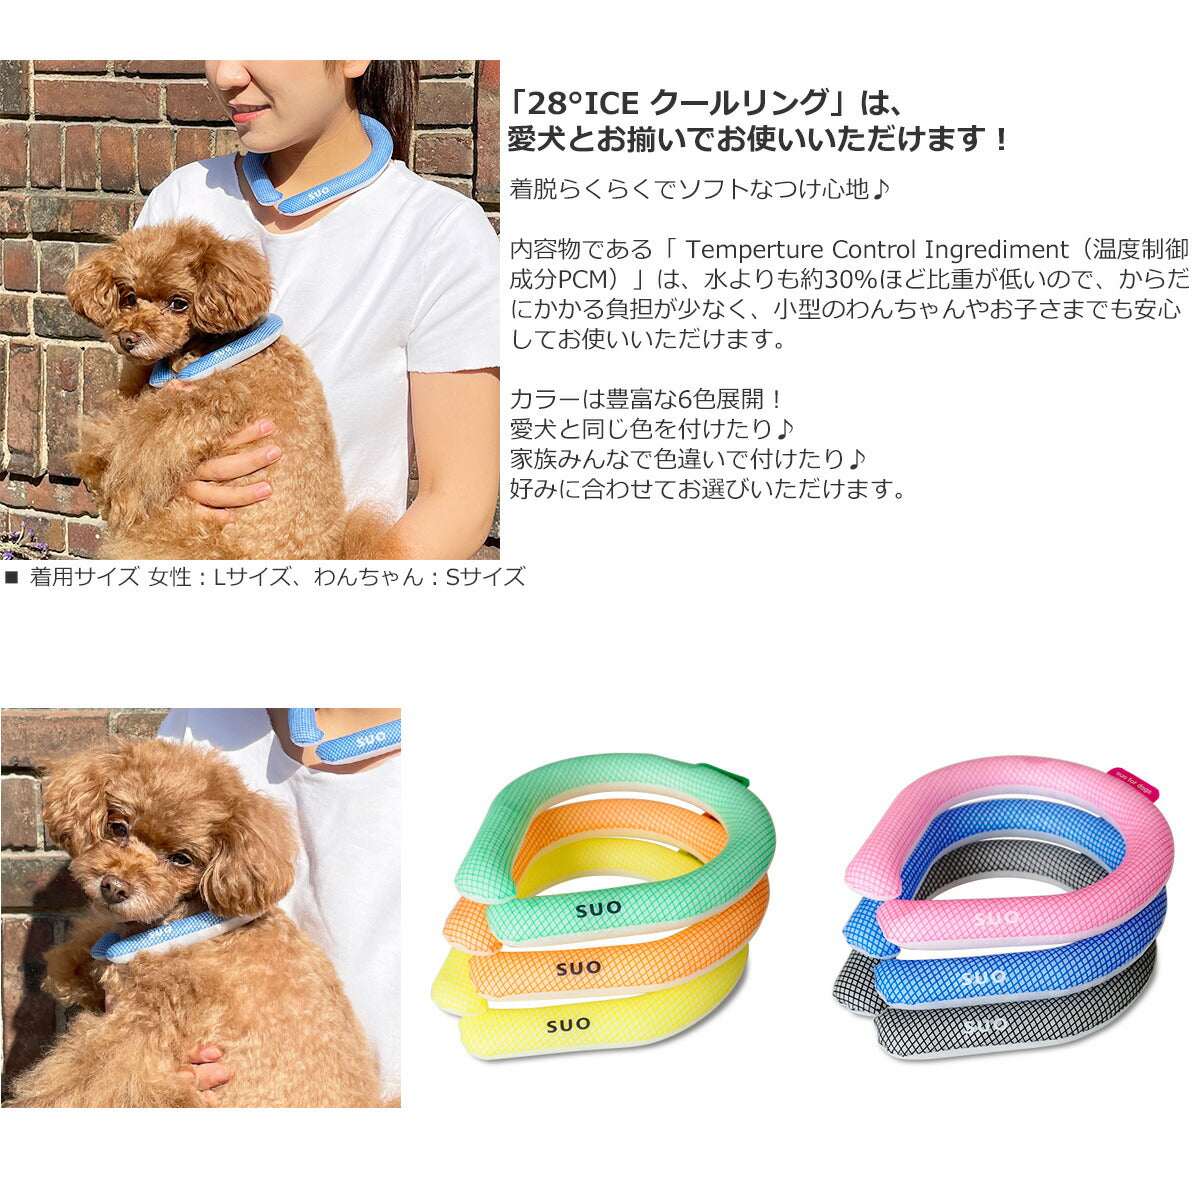 SUO for dogs 28°ICE SUOリング ボタンなし L ピンク 熱中症対策グッズ 暑さ対策 ひんやり 首 冷感 犬 大人 子供